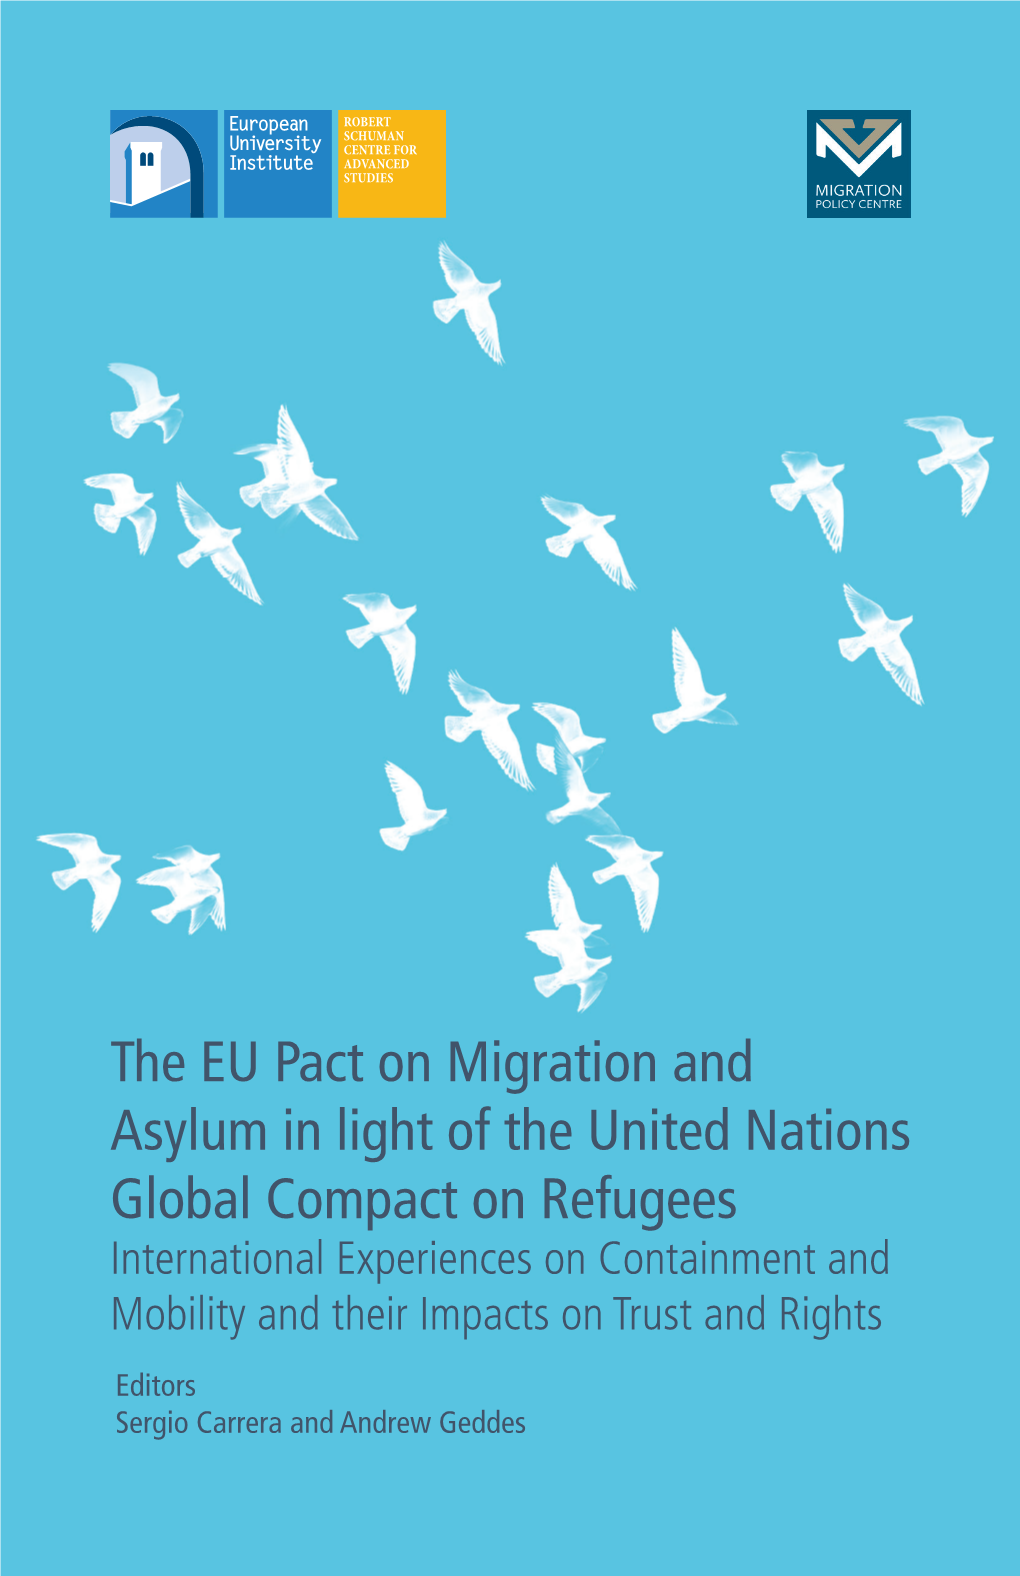 The EU Pact on Migration and Asylum in Light of the United Nations Global